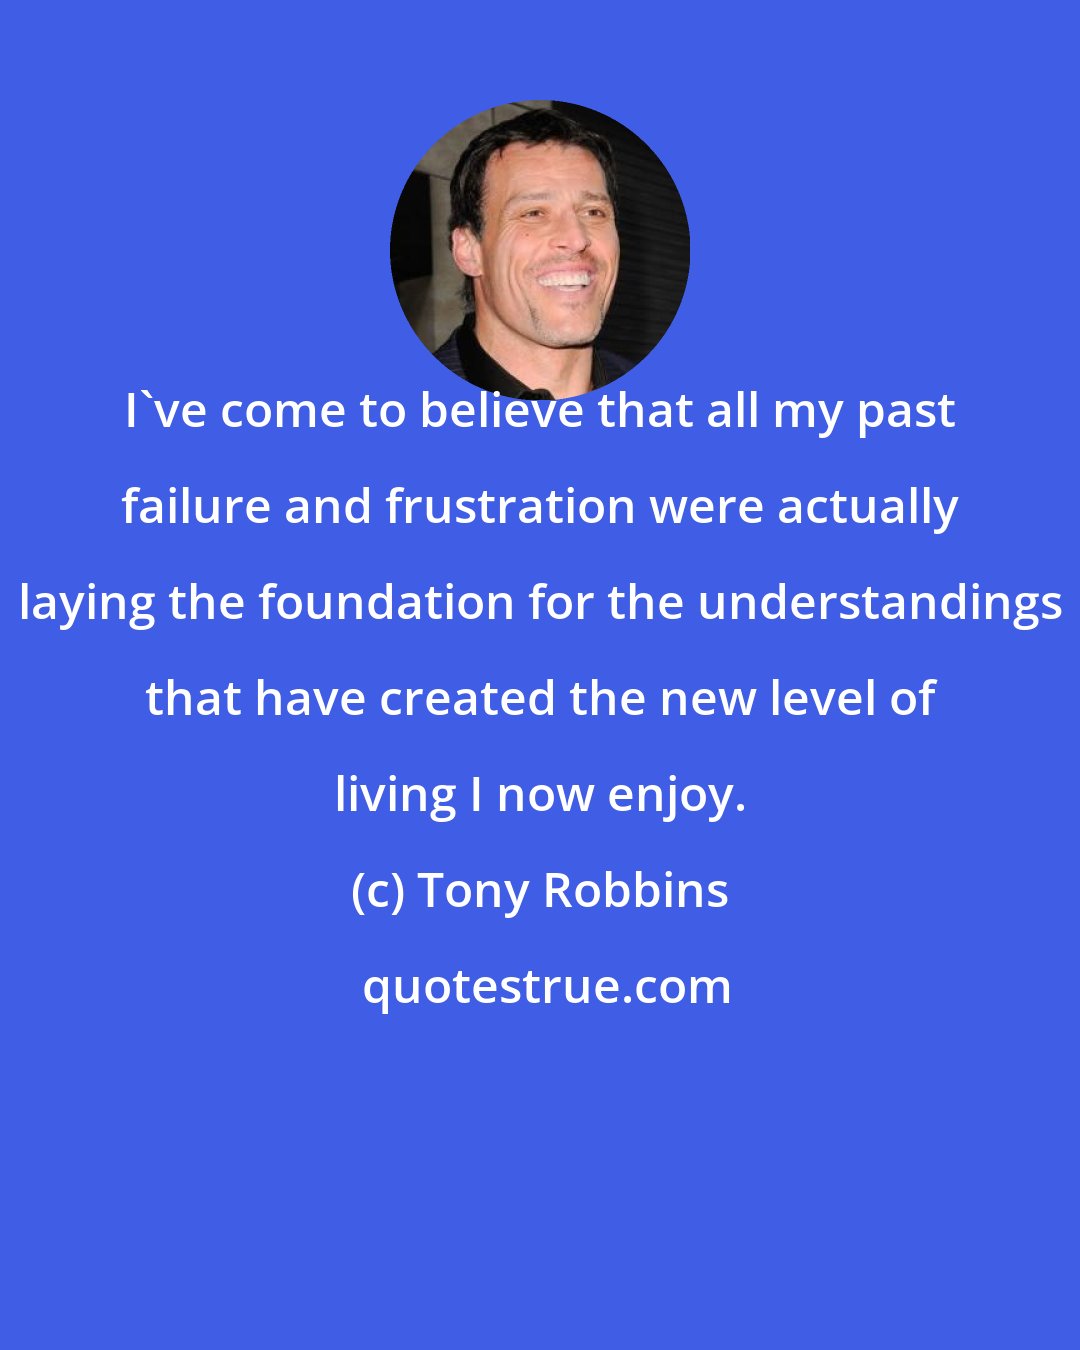 Tony Robbins: I've come to believe that all my past failure and frustration were actually laying the foundation for the understandings that have created the new level of living I now enjoy.